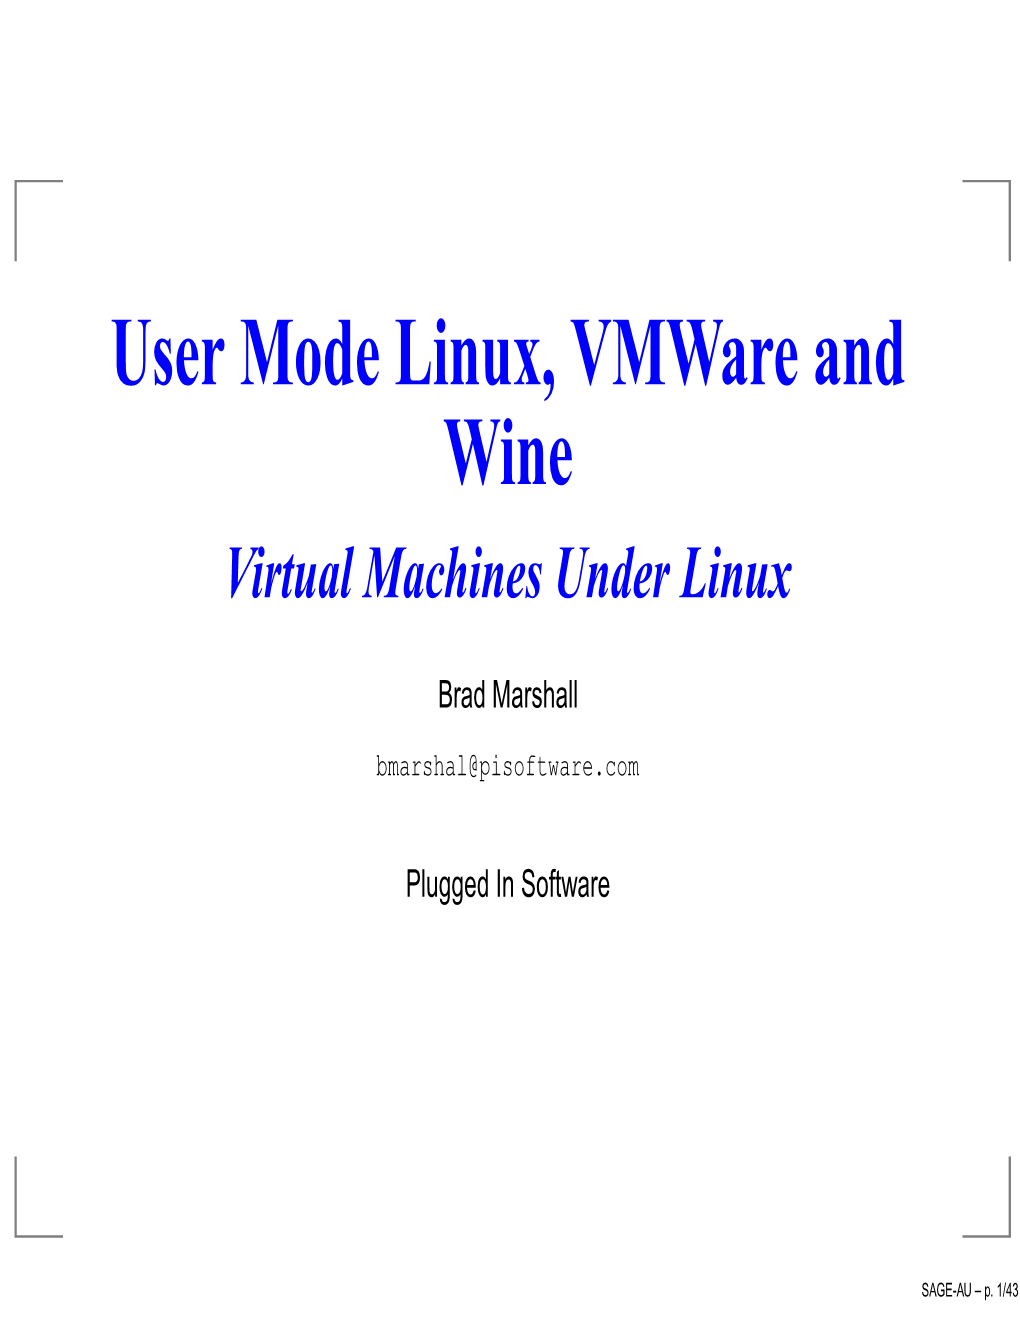 User Mode Linux, Vmware and Wine Virtual Machines Under Linux